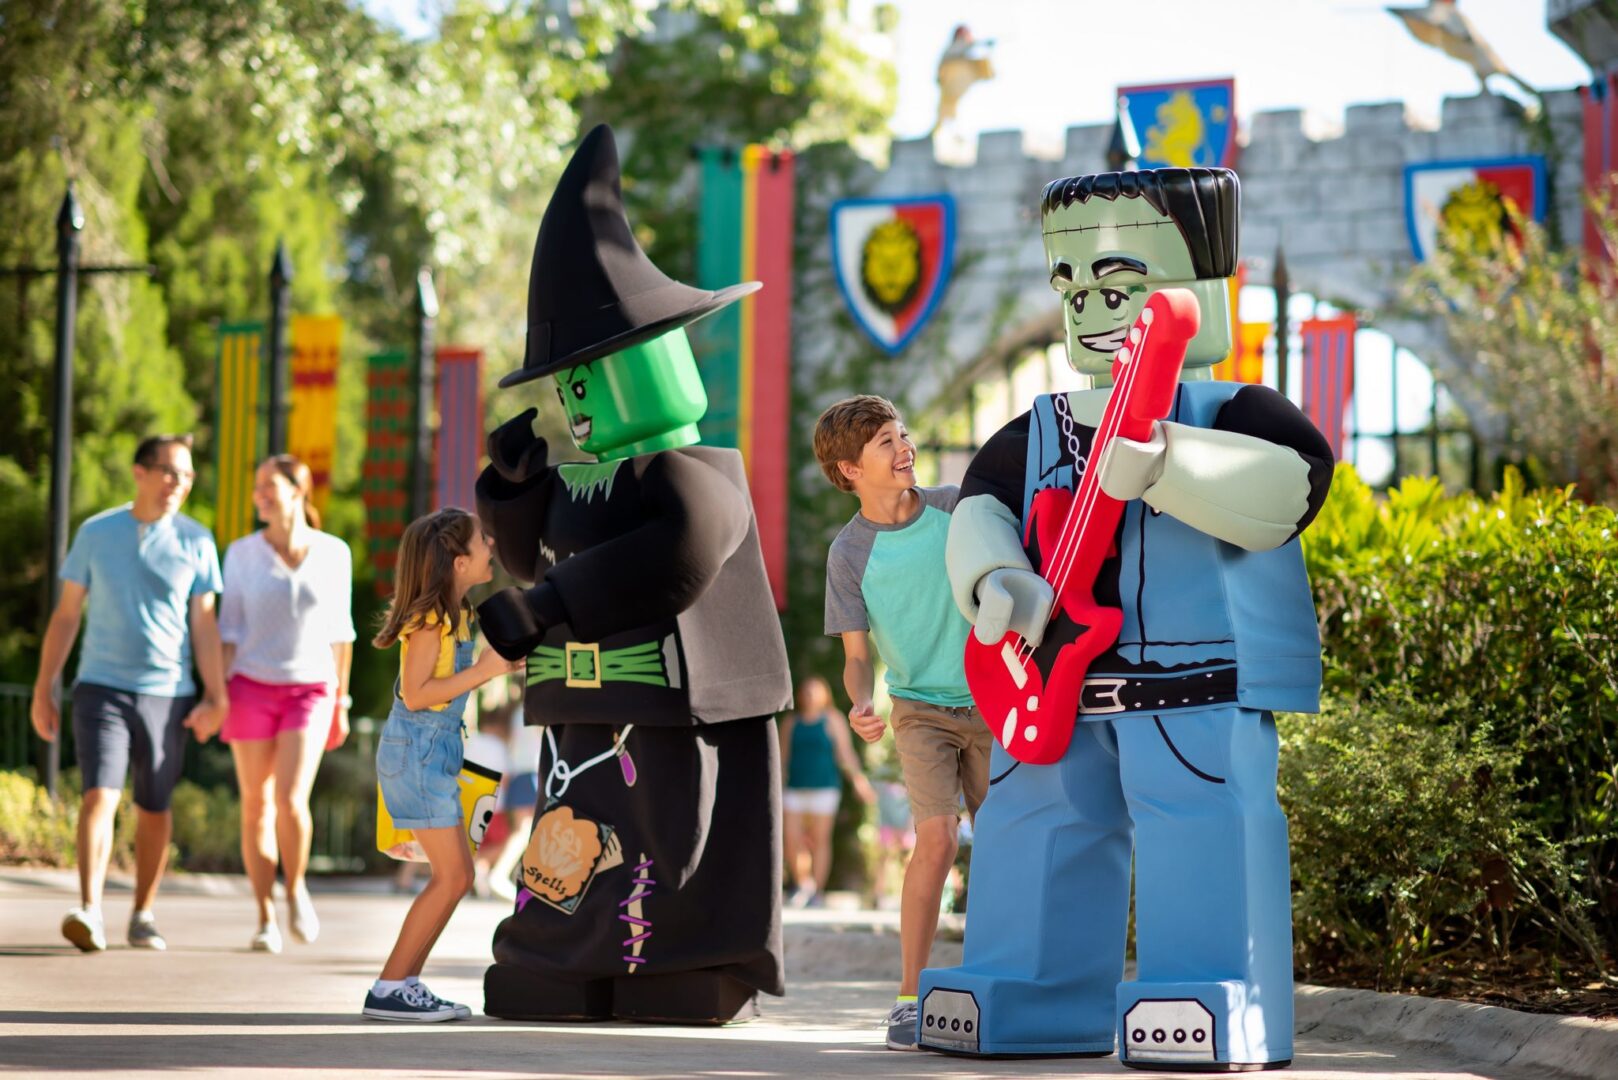 LEGOLAND Florida Resort Launches Limited Buy One, Get One 50% Off Annual Pass Promotion